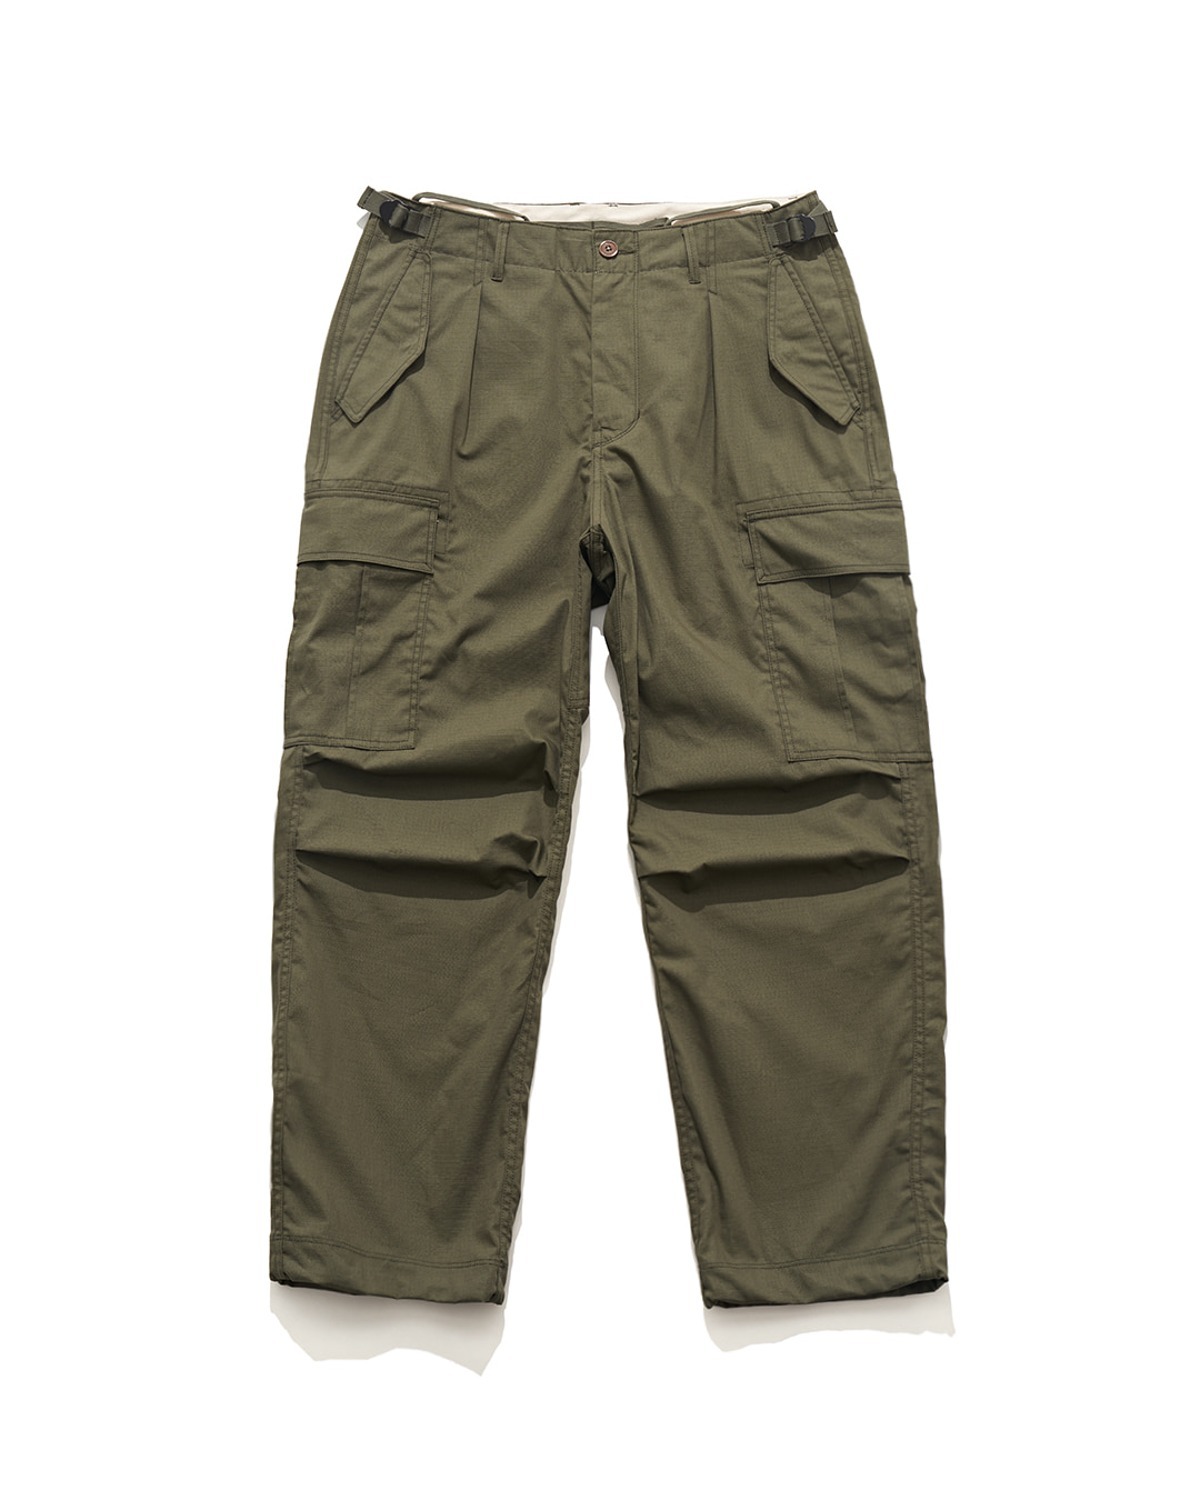 FIELD PANTS WIDE FIT / OLIVE RIPSTOP